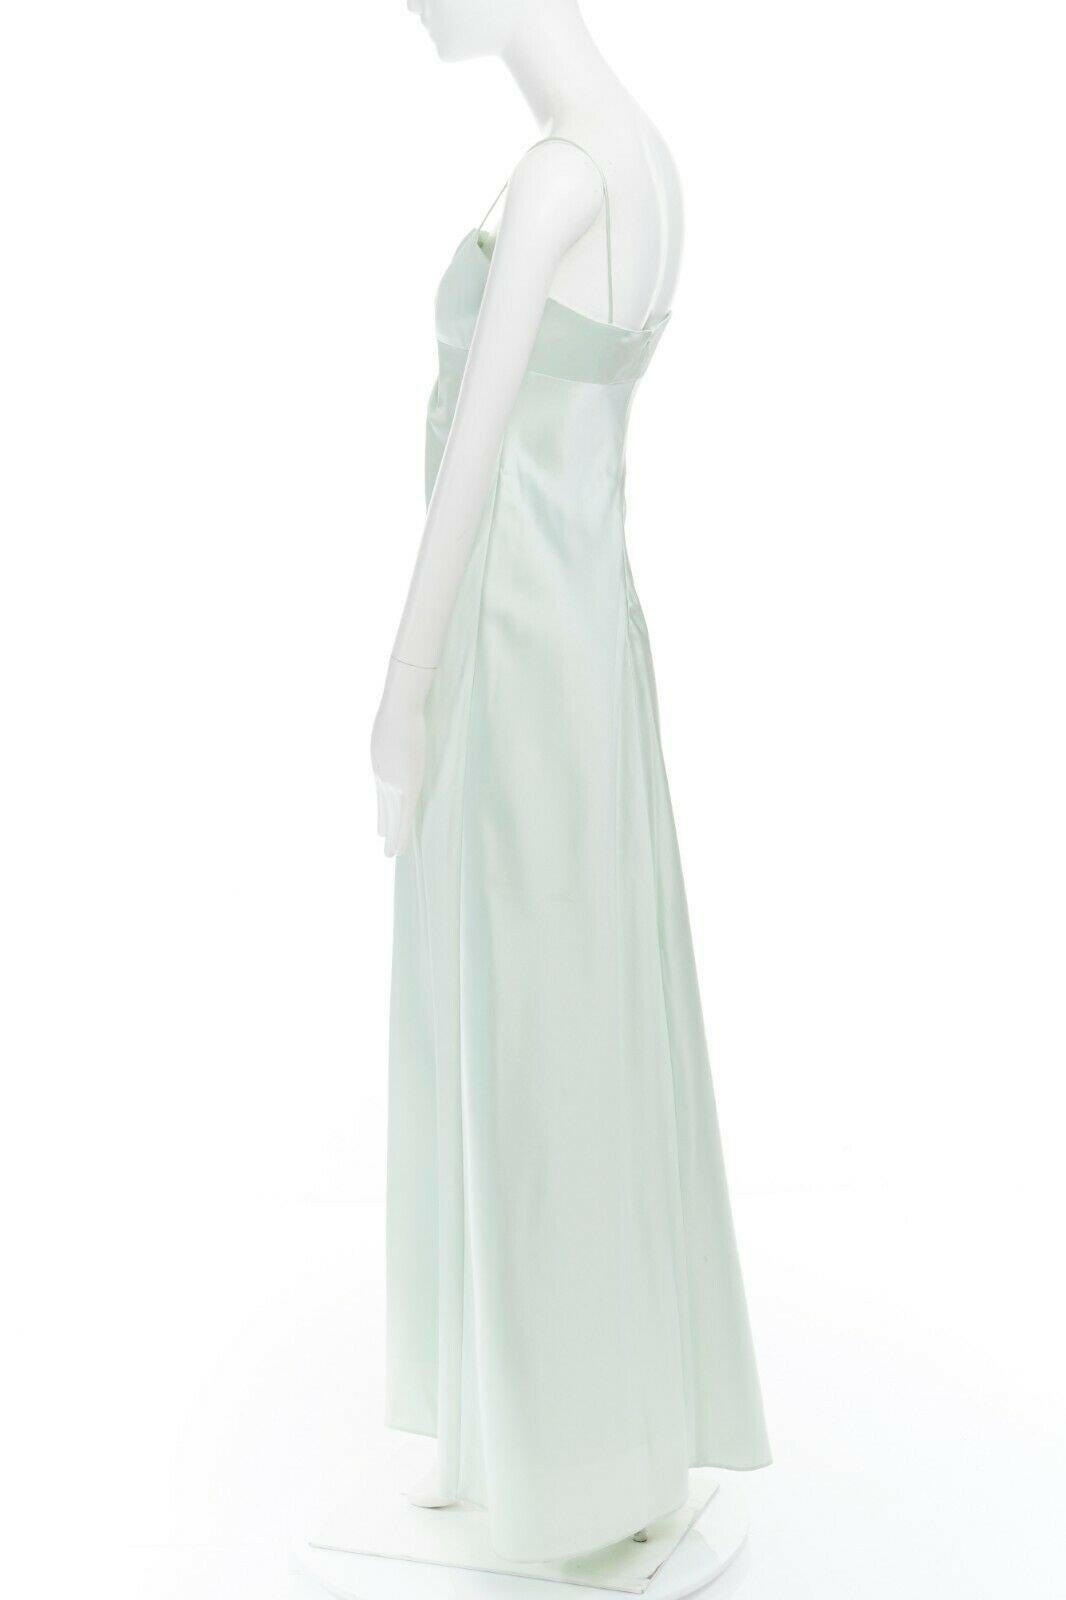 Gray LAUNDRY SHELLI SEGAL pastel green gathered dart bust evening gown US8 M